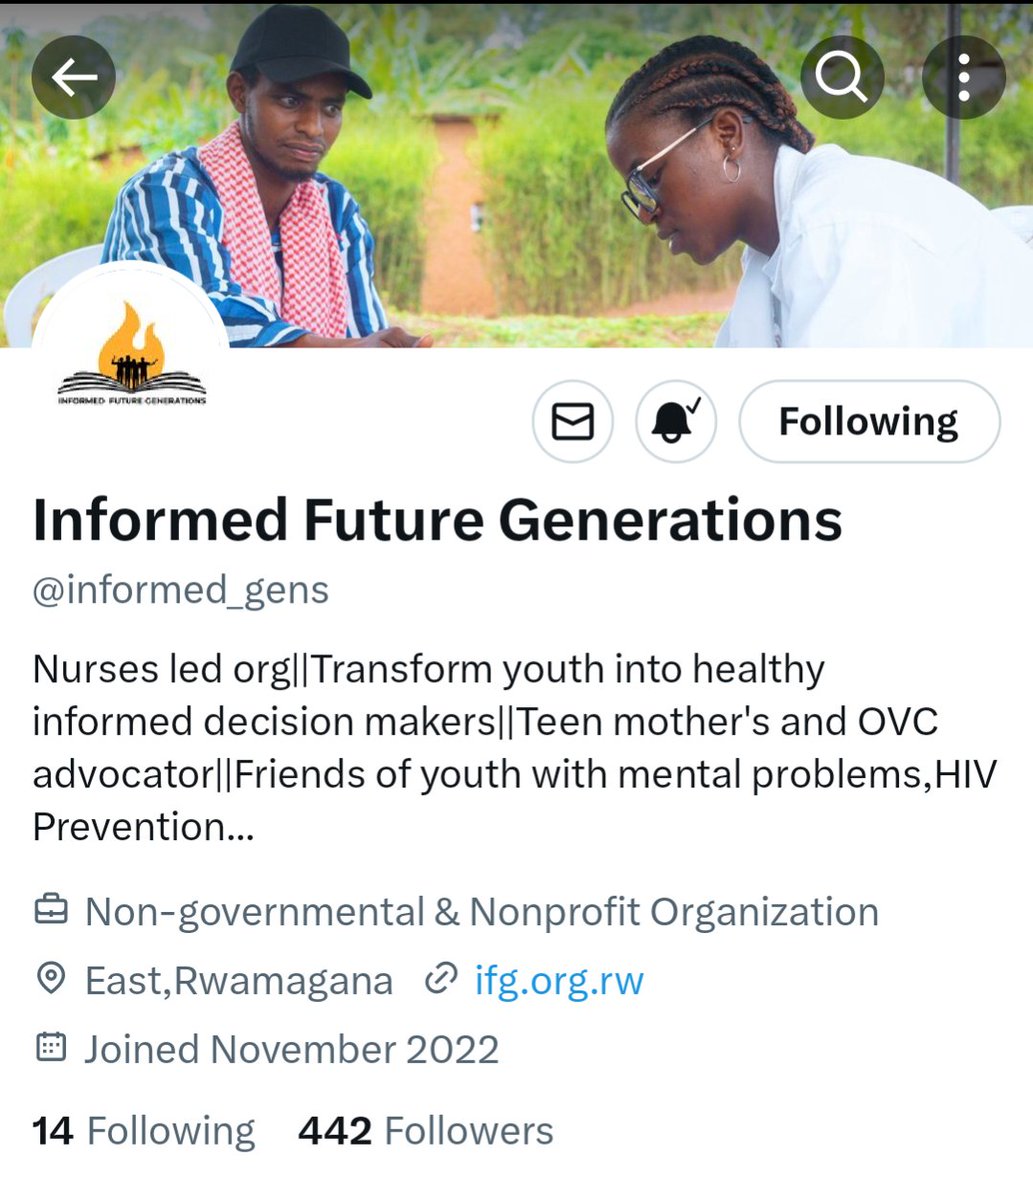 Are you interested in becoming a #healthy informed decision maker about your #SRHR, #HIV/#AIDS and #mentalhealth ?

Follow @informed_gens and #StayInformed  by #professional #nurses  about your #Health .
#GetTestedStayHealthy #NoOneIsImmune #LikeYourSister 
@PlanRwanda @ozonnia